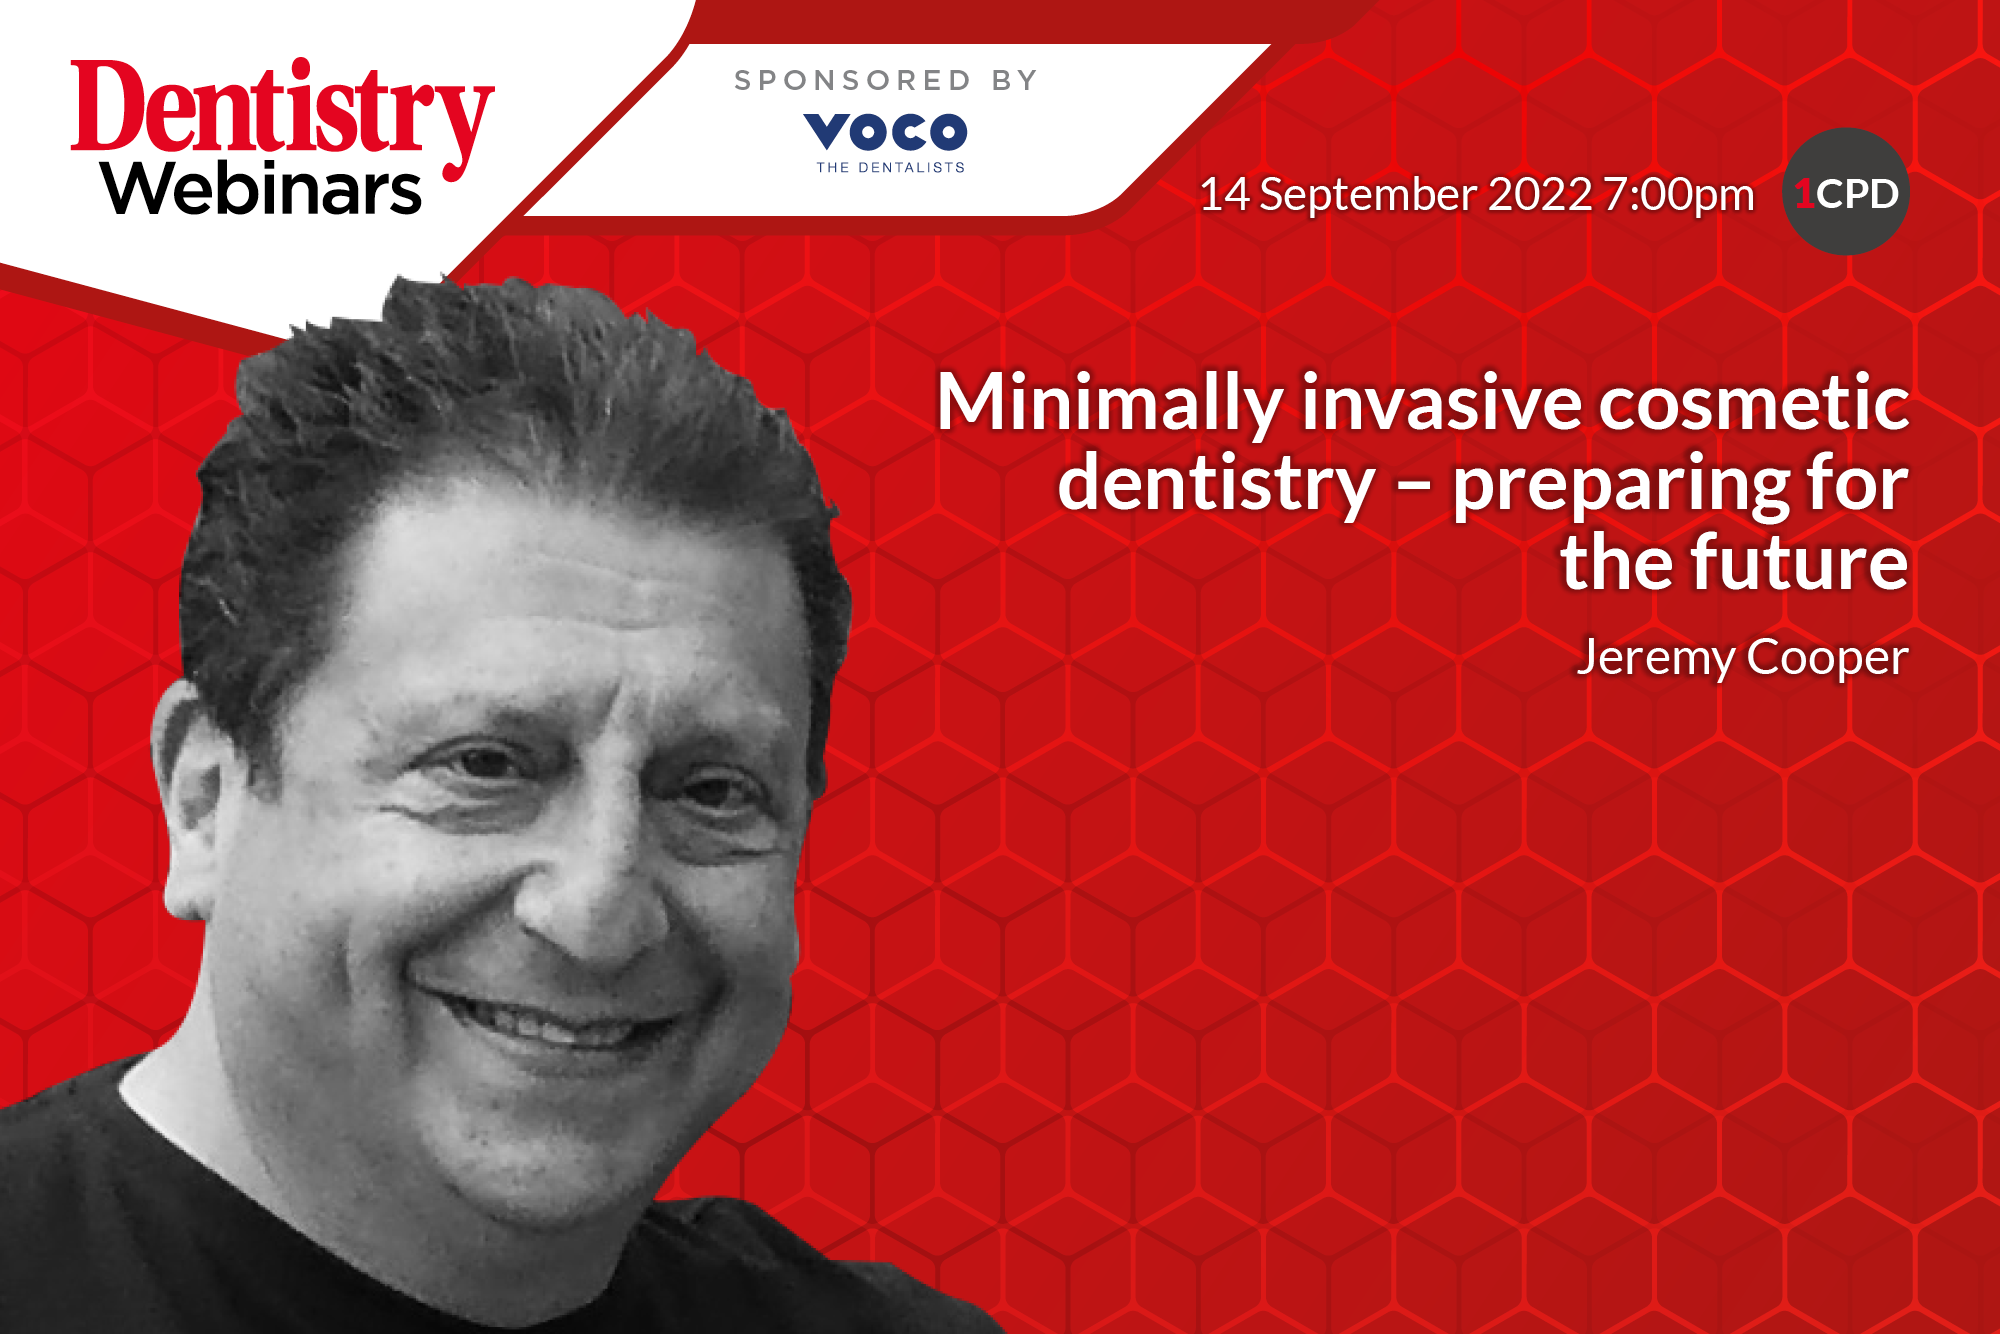 Join Jeremy Cooper on 14 September at 7pm as he discusses minimally invasive cosmetic dentistry – sign up now!